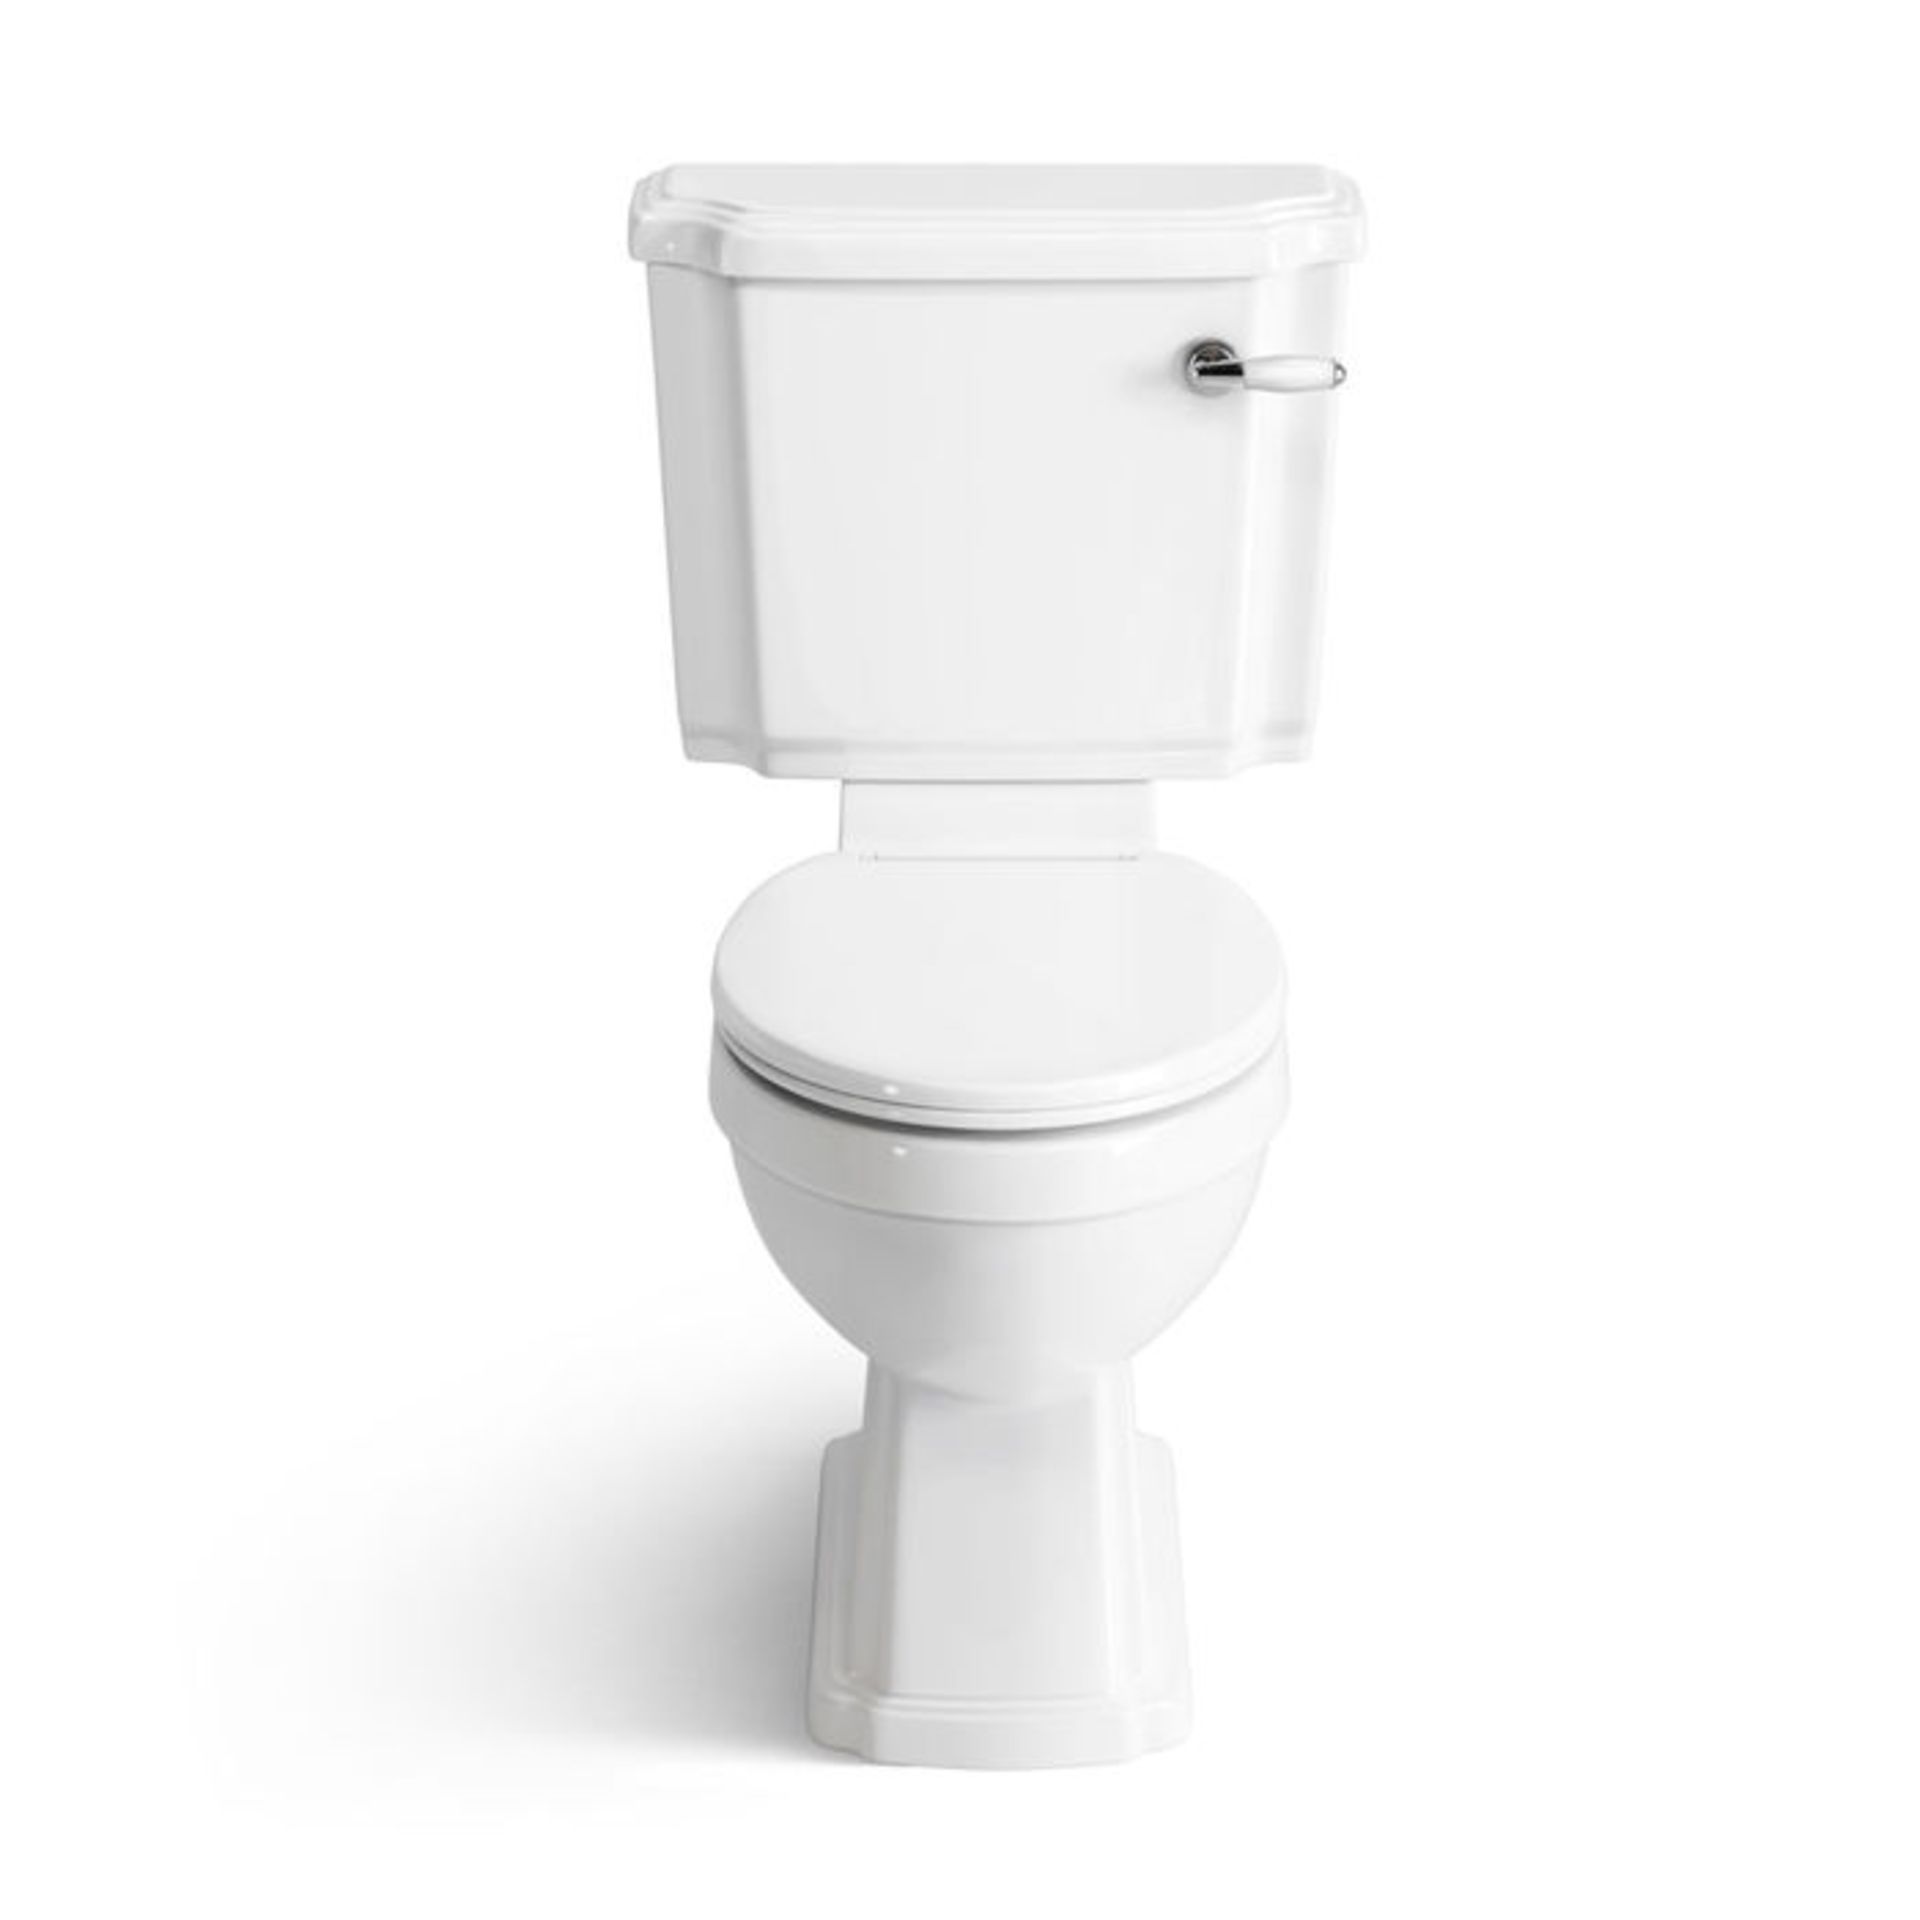 (OS242) Cambridge Traditional Close Coupled Toilet & Cistern - White Seat Traditional features add - Image 3 of 4